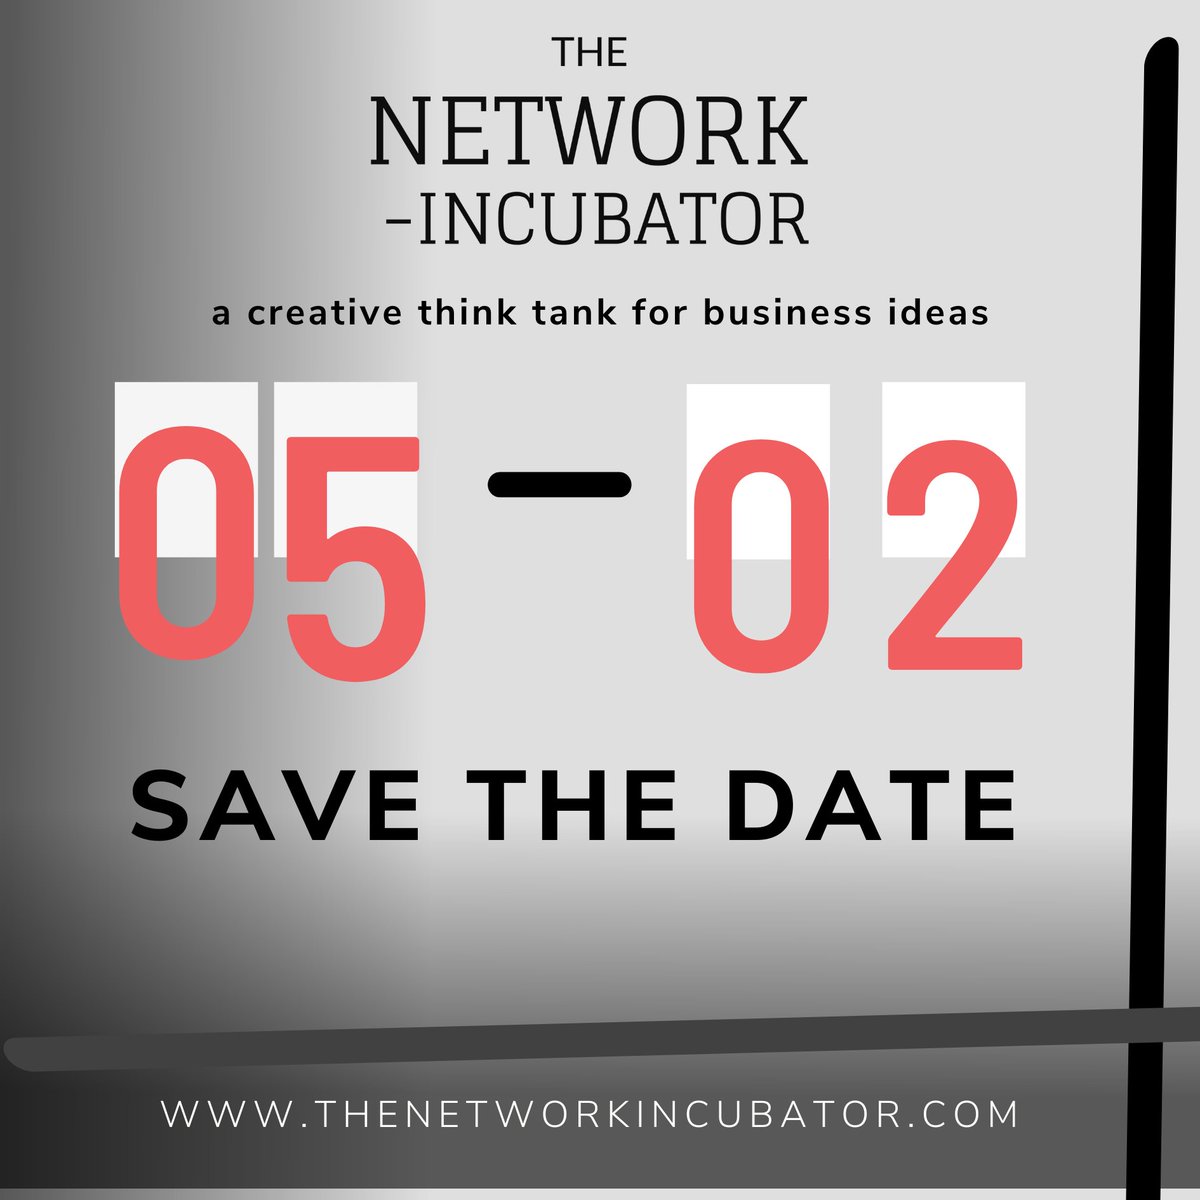 SAVE THE DATE FOR THE NETWORK INCUBATOR. 

ONLINE ONLY THIS MONTH. 

May 2nd at 9 am. Register at zurl.co/UzNY

#thenetworkincubator #networkingevent #networkingtips #business #community #entrepreneurs #smallbusinessowners #startups